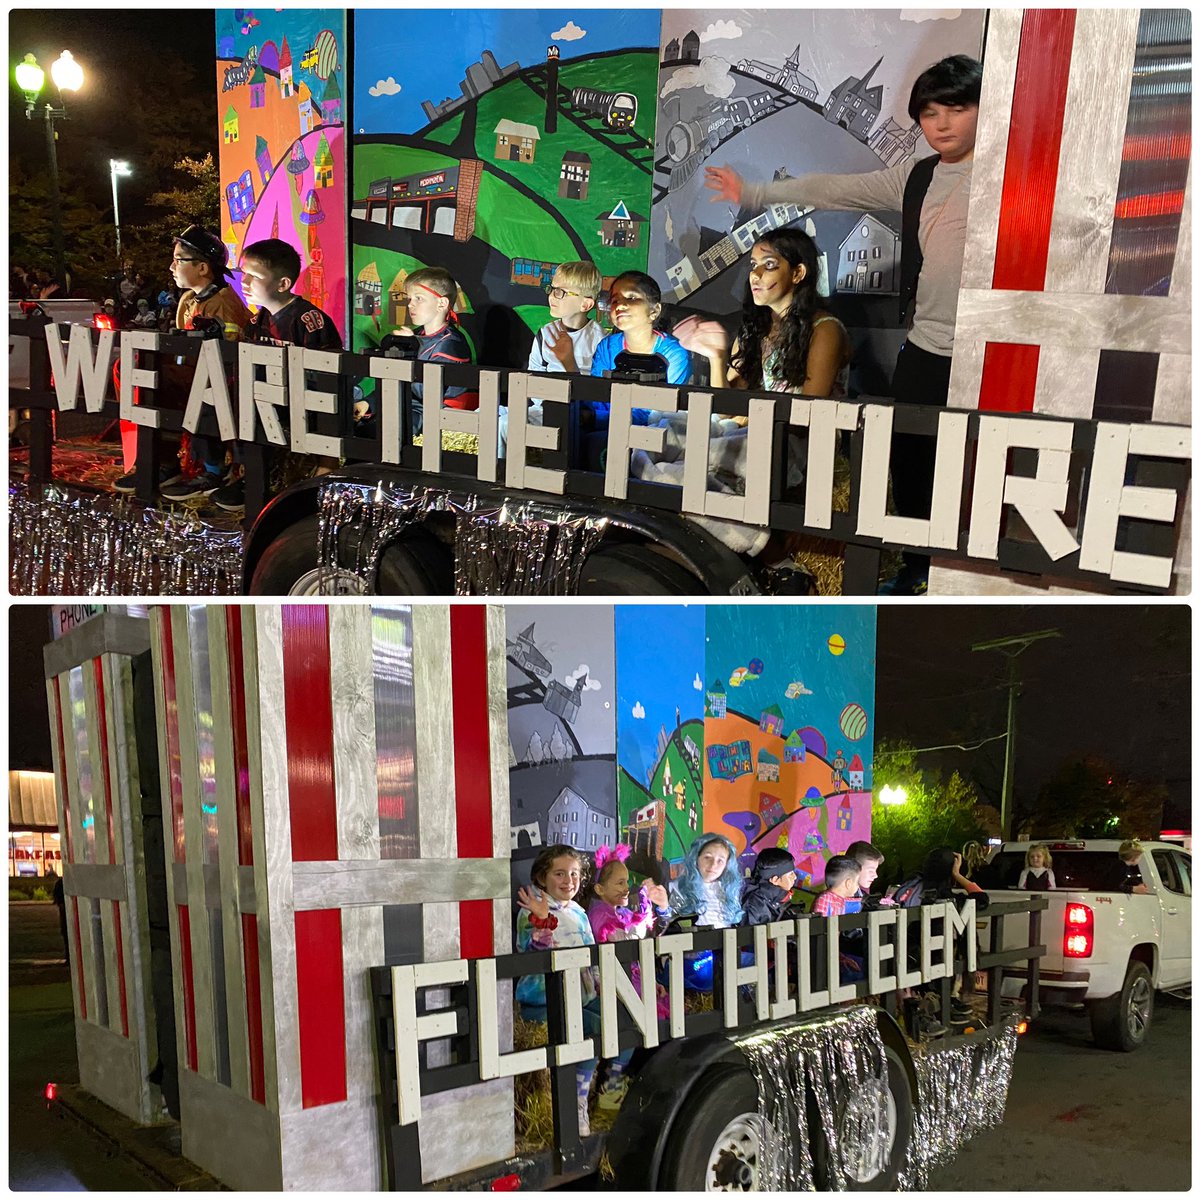 Fantastic job FHES @FlintHillES students and @MissMsArtFeed for creating another beautiful float for the Vienna Halloween Parade 🎃This was another awesome effort🎃Thanks to the Town of Vienna for bringing our community together👍🏻🥇 #FHESilluminates #FHESfamily @TownofViennaVA